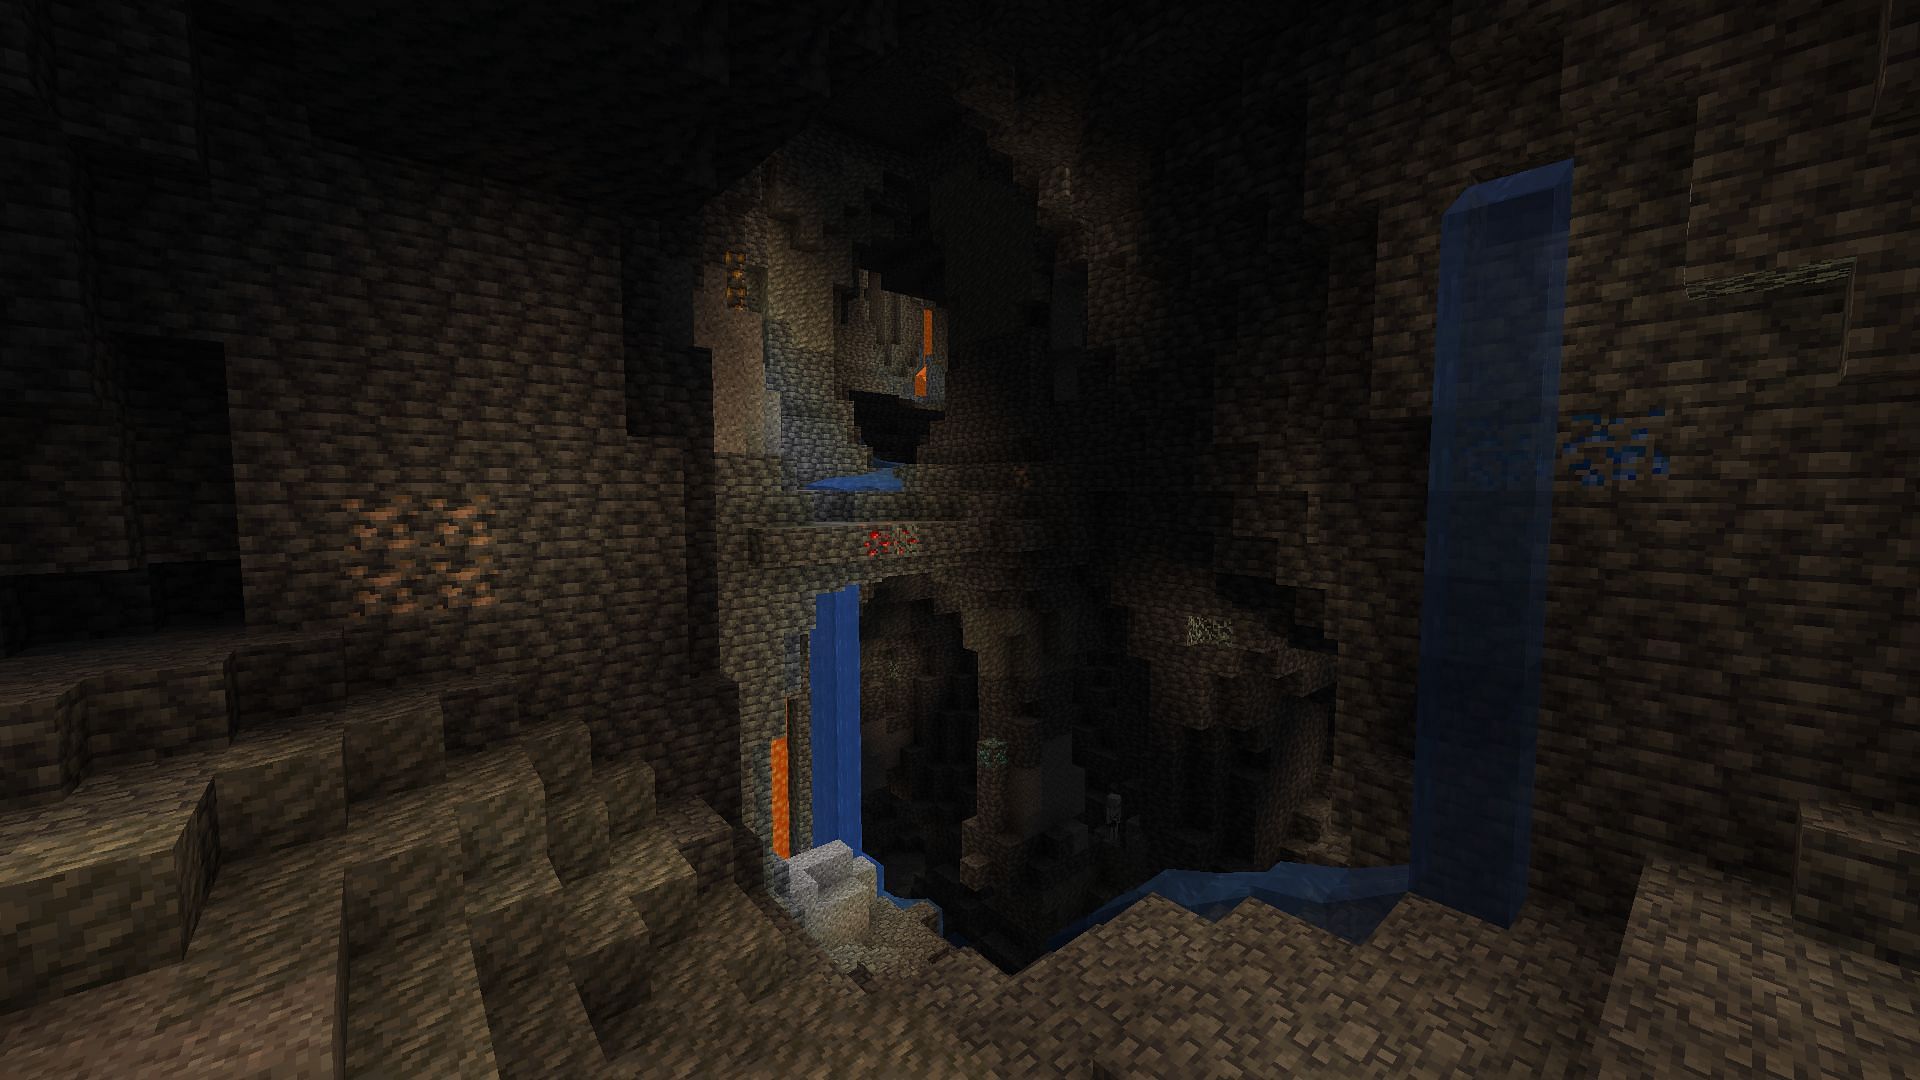 Caves get even creepier with new sound effects in Minecraft Preview 1.21.0.23 (Image via Mojang)